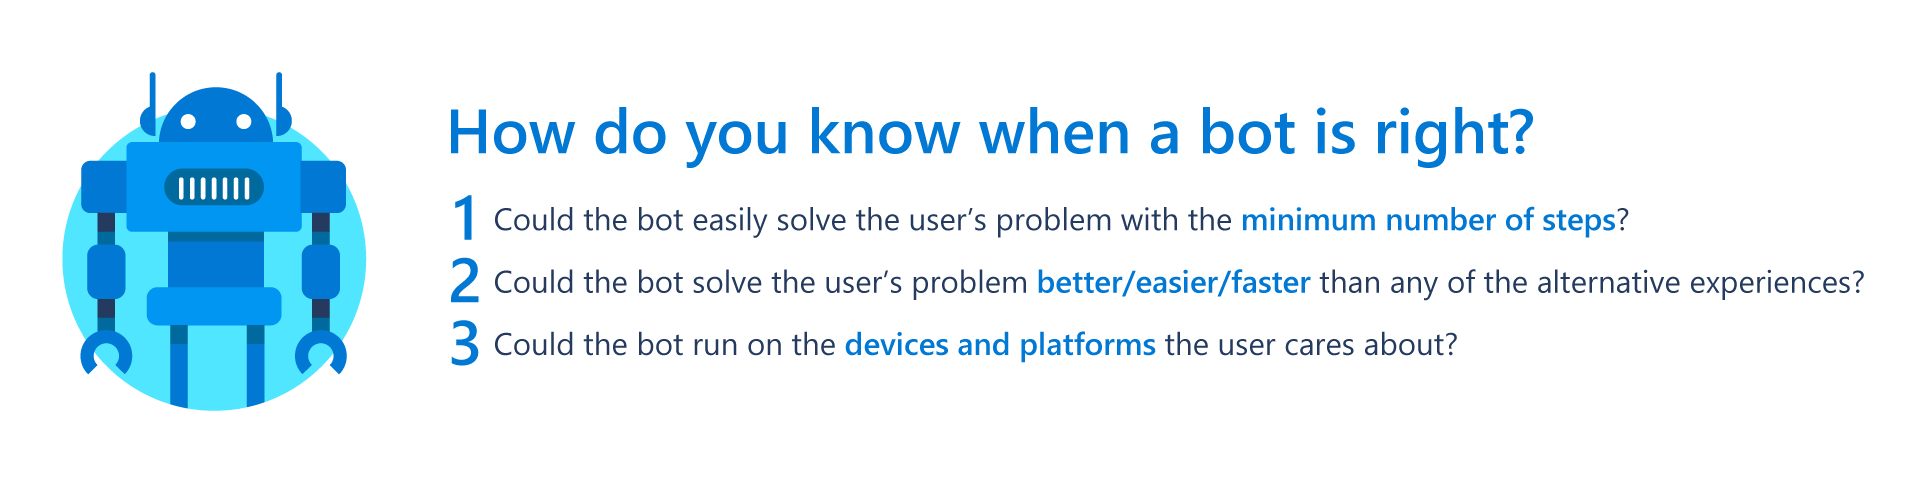 How do you know when a bot is right? Could the bot easily solve the user’s problem with the minimum number of steps? Will the bot solve the user’s problem better/easier/faster than any of the alternative experiences? Could the bot run on the devices and platforms the user cares about?